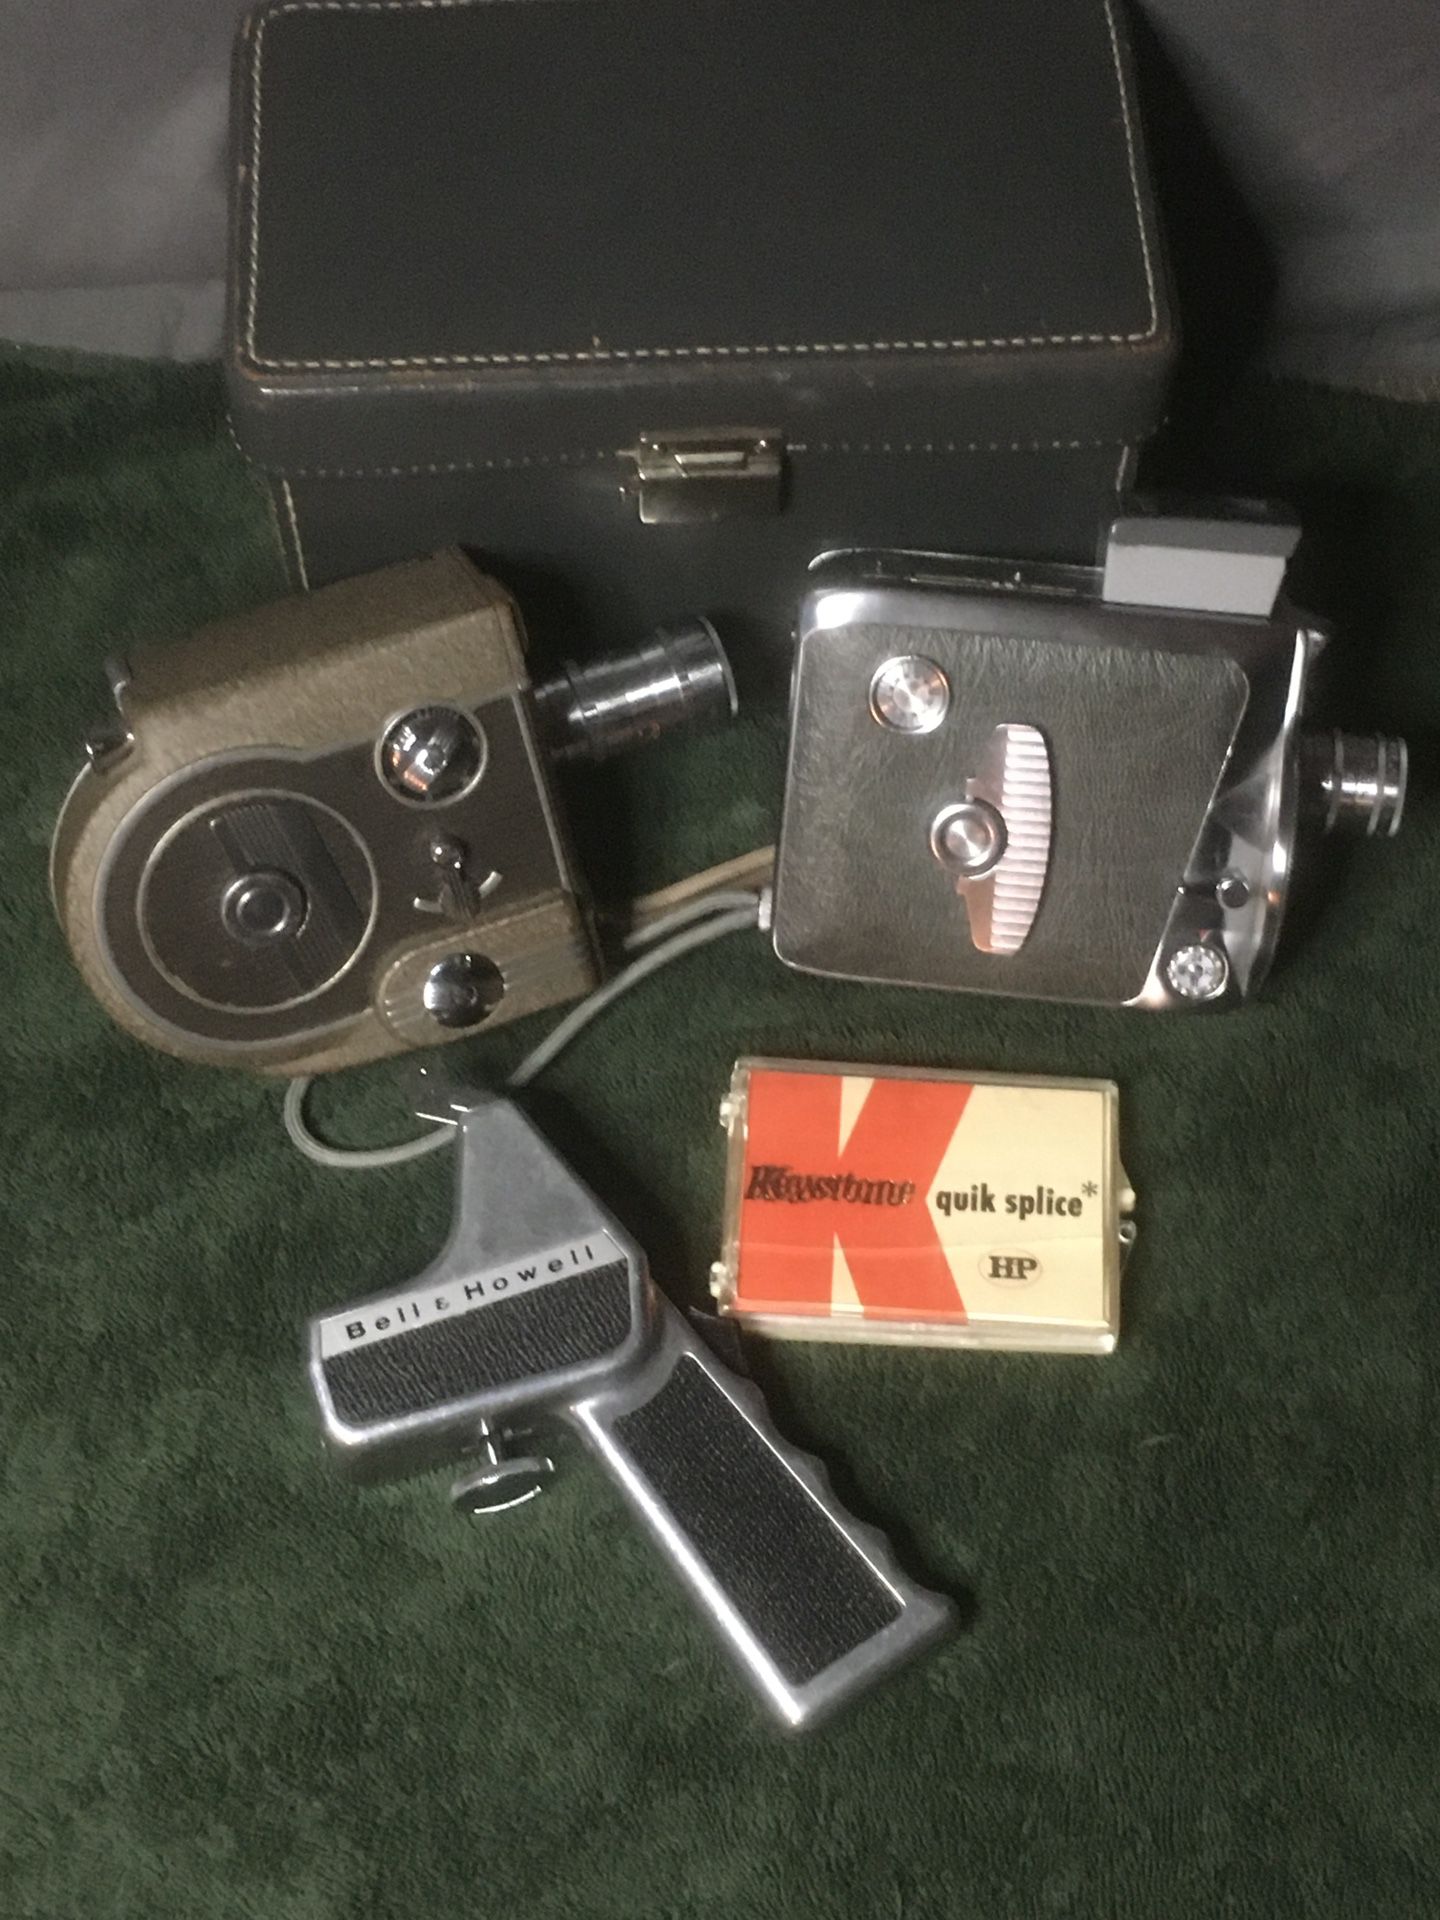 Vintage Filming Equipment - All In Perfect Working Condition!